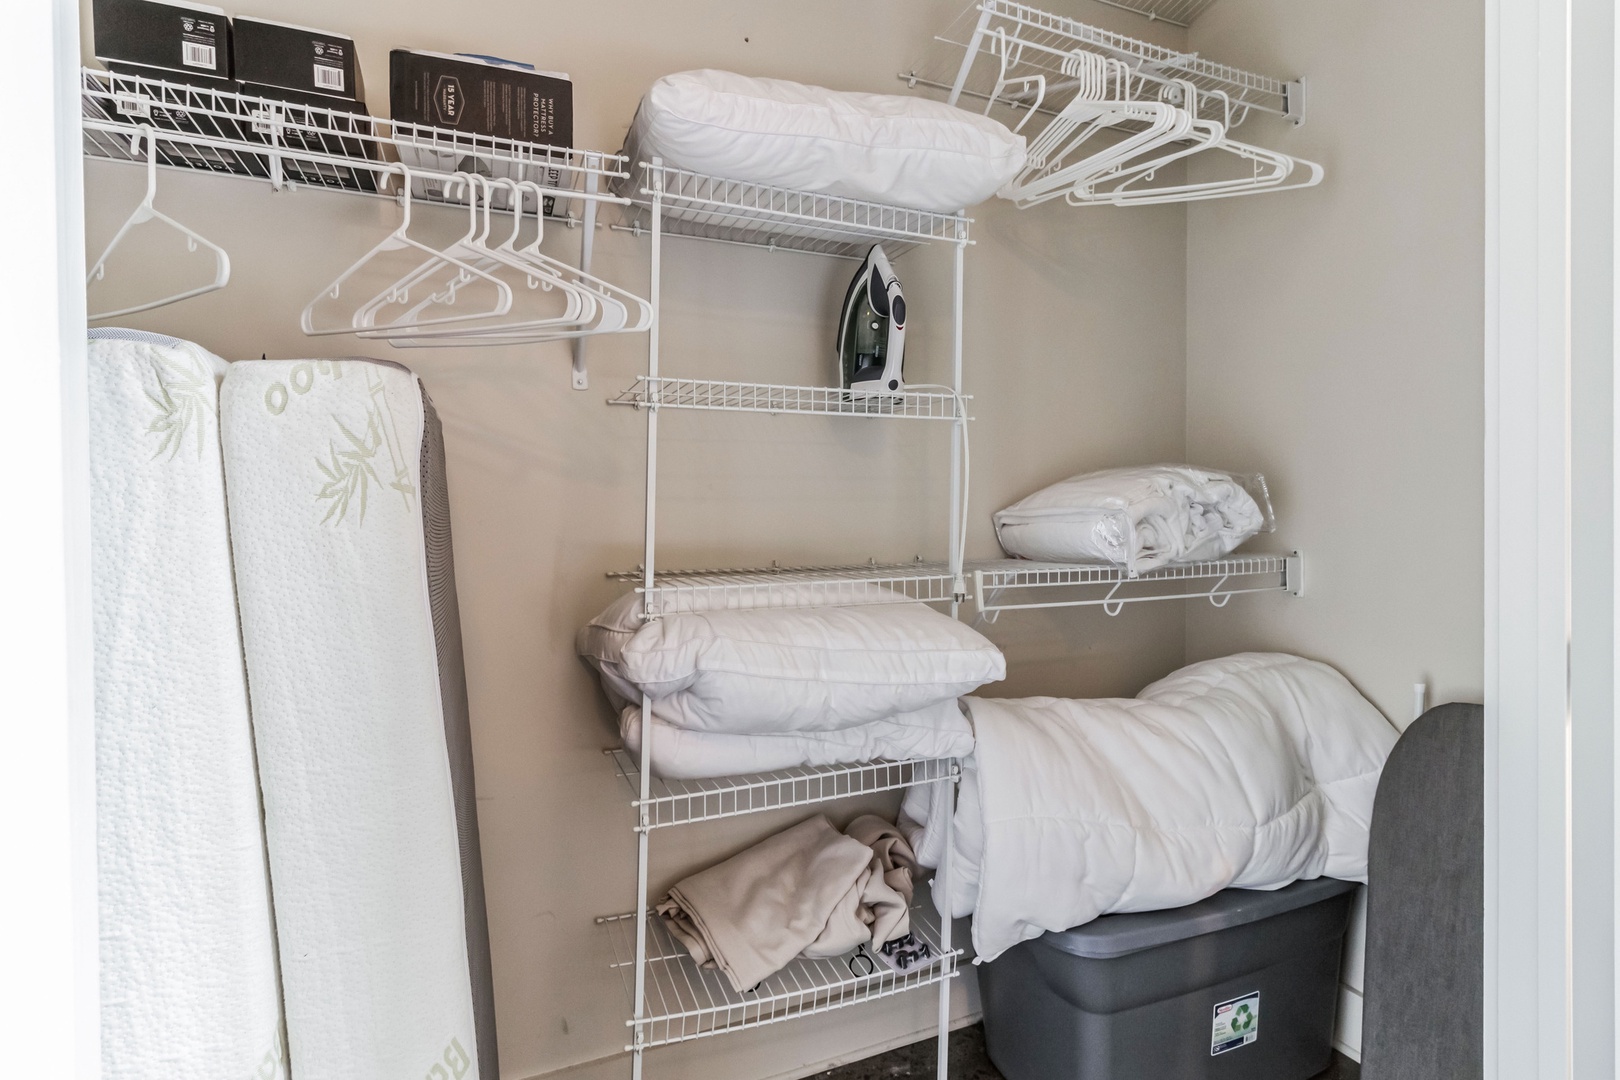 Ample storage space in the bedroom closet